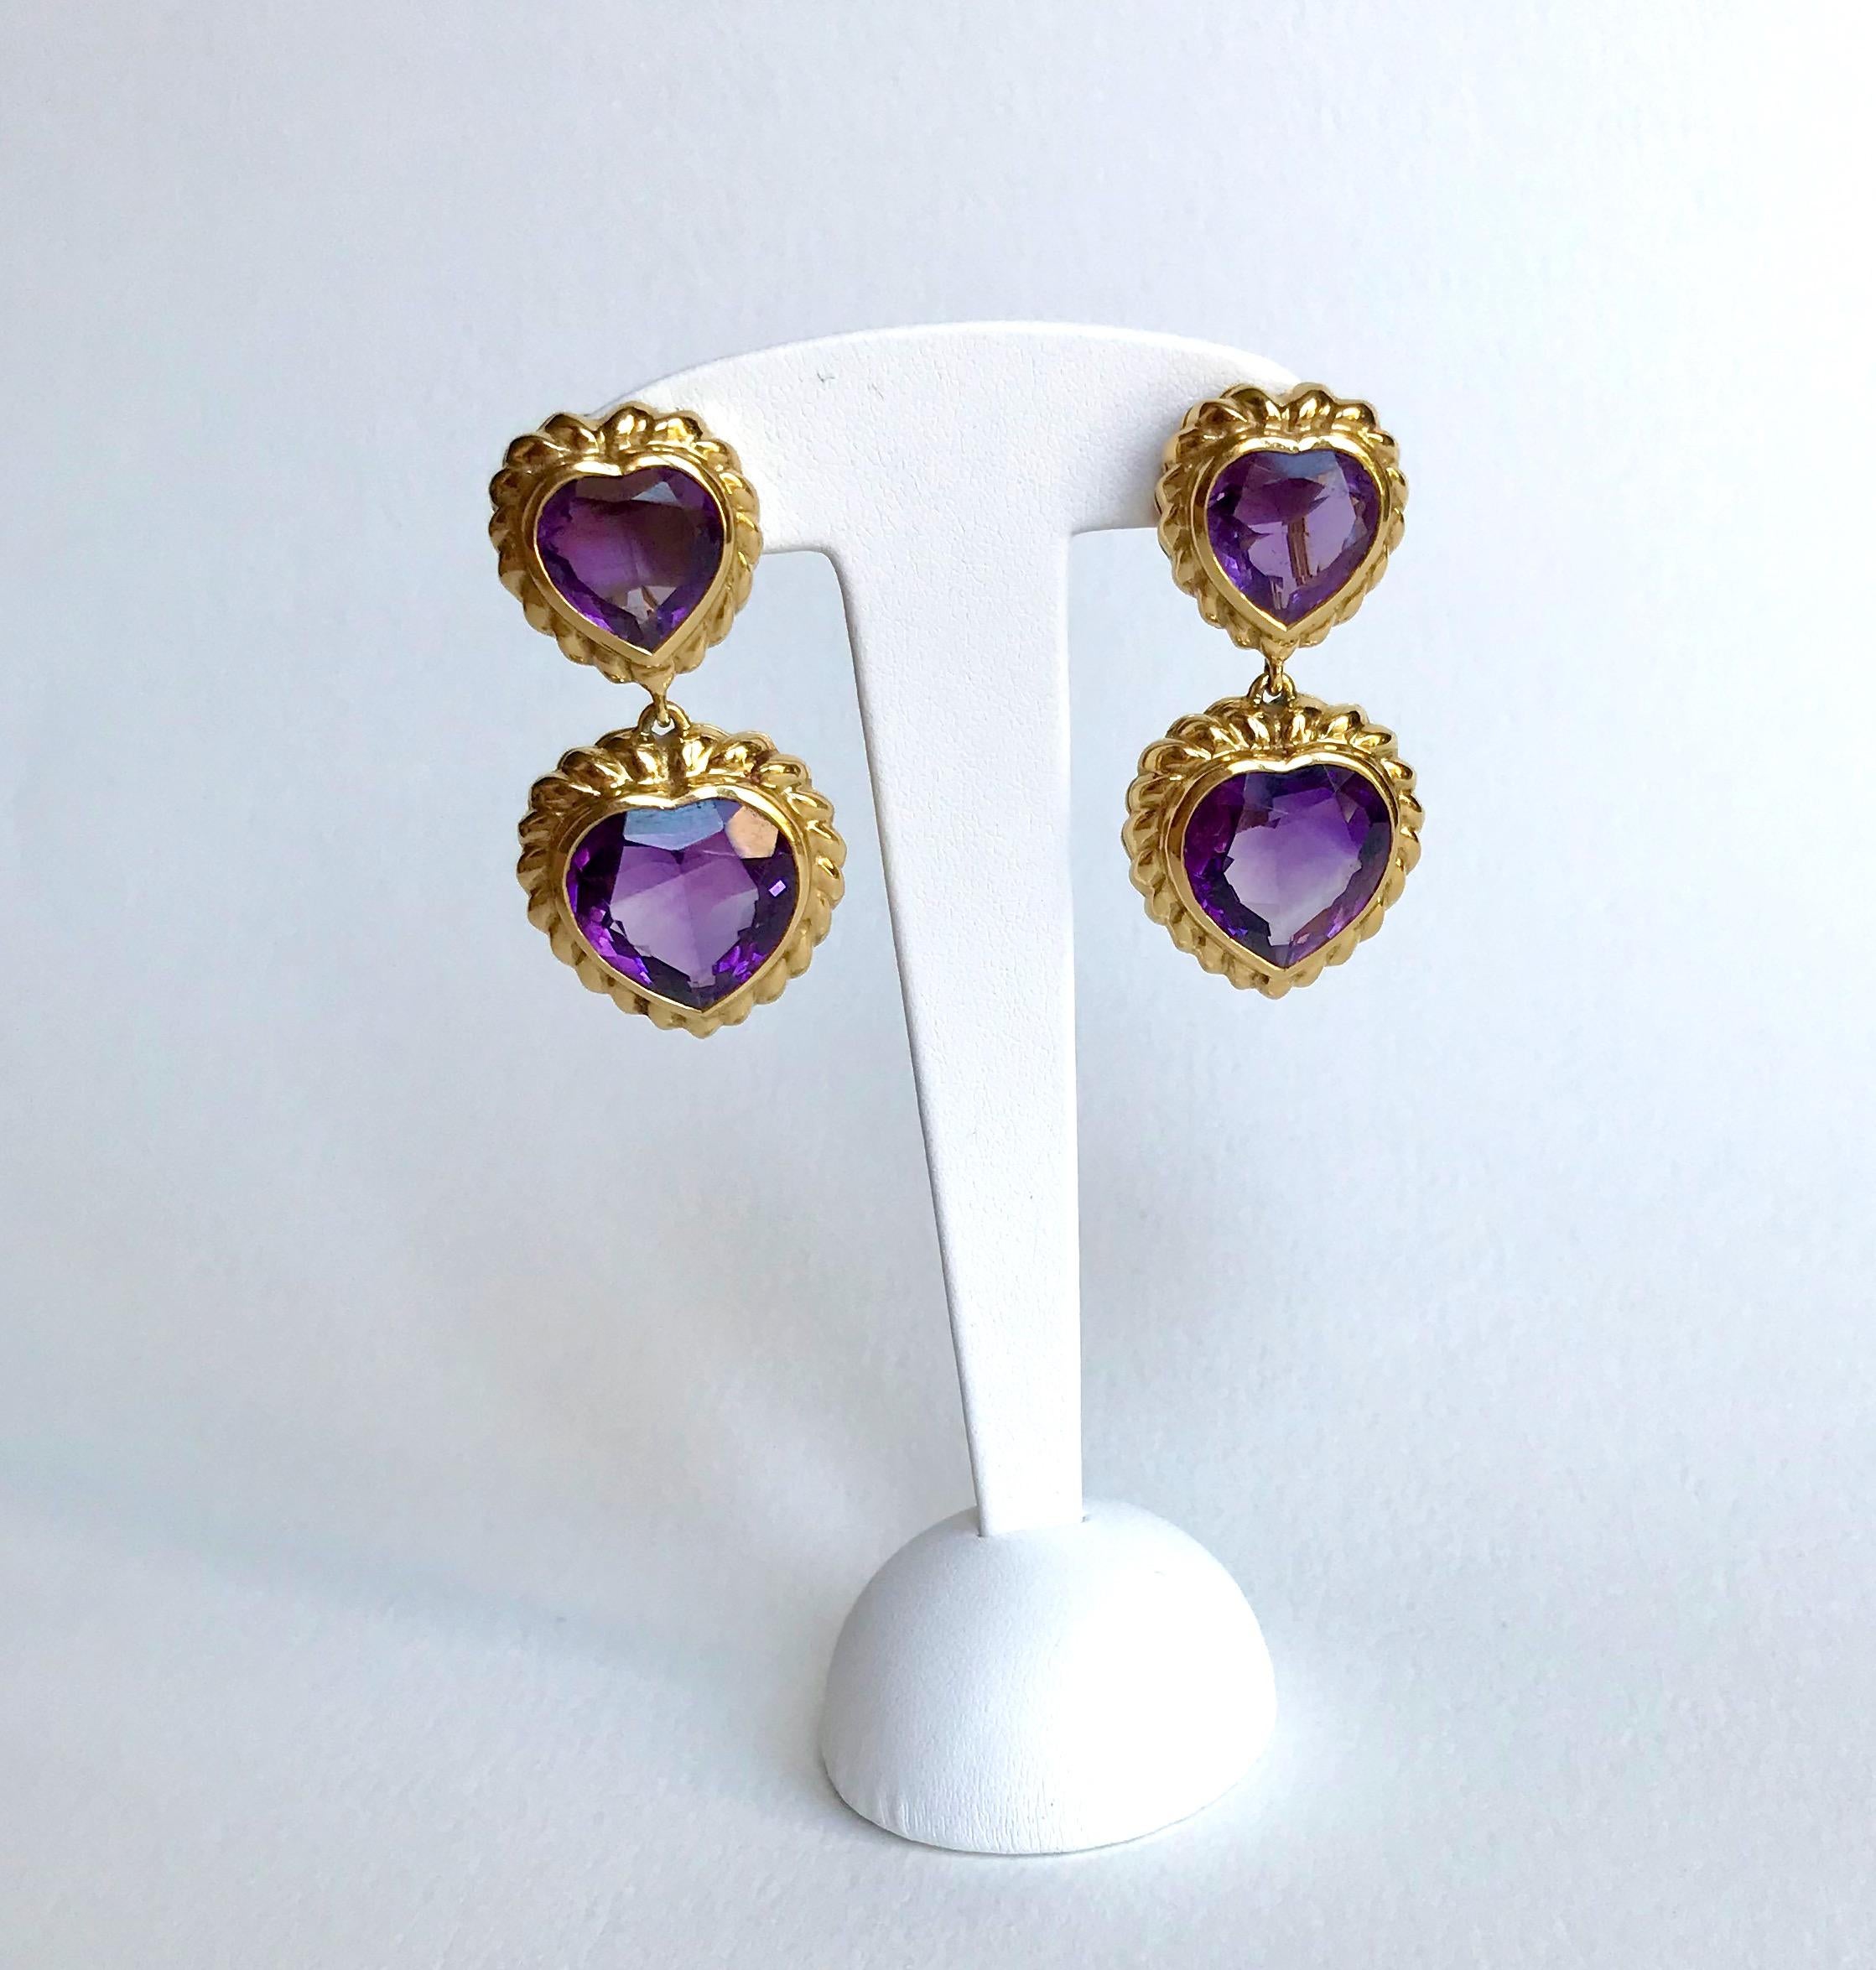 FRED Earrings in gadrooned 18-carat yellow gold setting two large heart-shaped amethysts in a bezel setting.
Dimensions of the amethysts: the top one is 1.3 x 1.3 cm, the bottom one is 1.7 x 1.7 cm
Height of earrings: 5 cm Width: 2.5 cm
For pierced